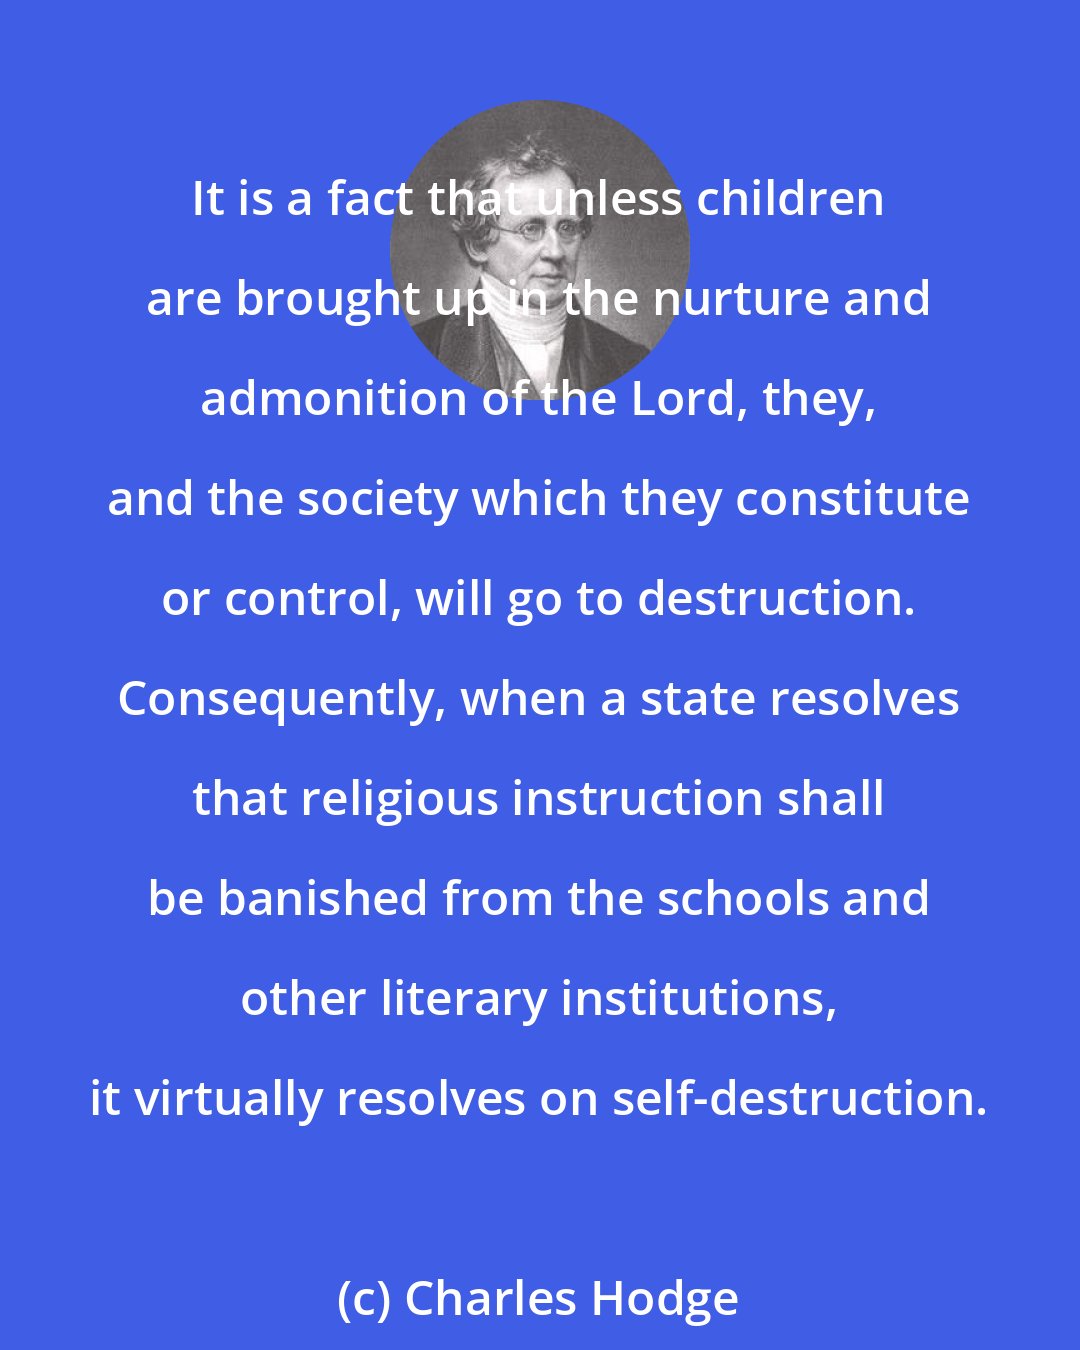 Charles Hodge: It is a fact that unless children are brought up in the nurture and admonition of the Lord, they, and the society which they constitute or control, will go to destruction. Consequently, when a state resolves that religious instruction shall be banished from the schools and other literary institutions, it virtually resolves on self-destruction.